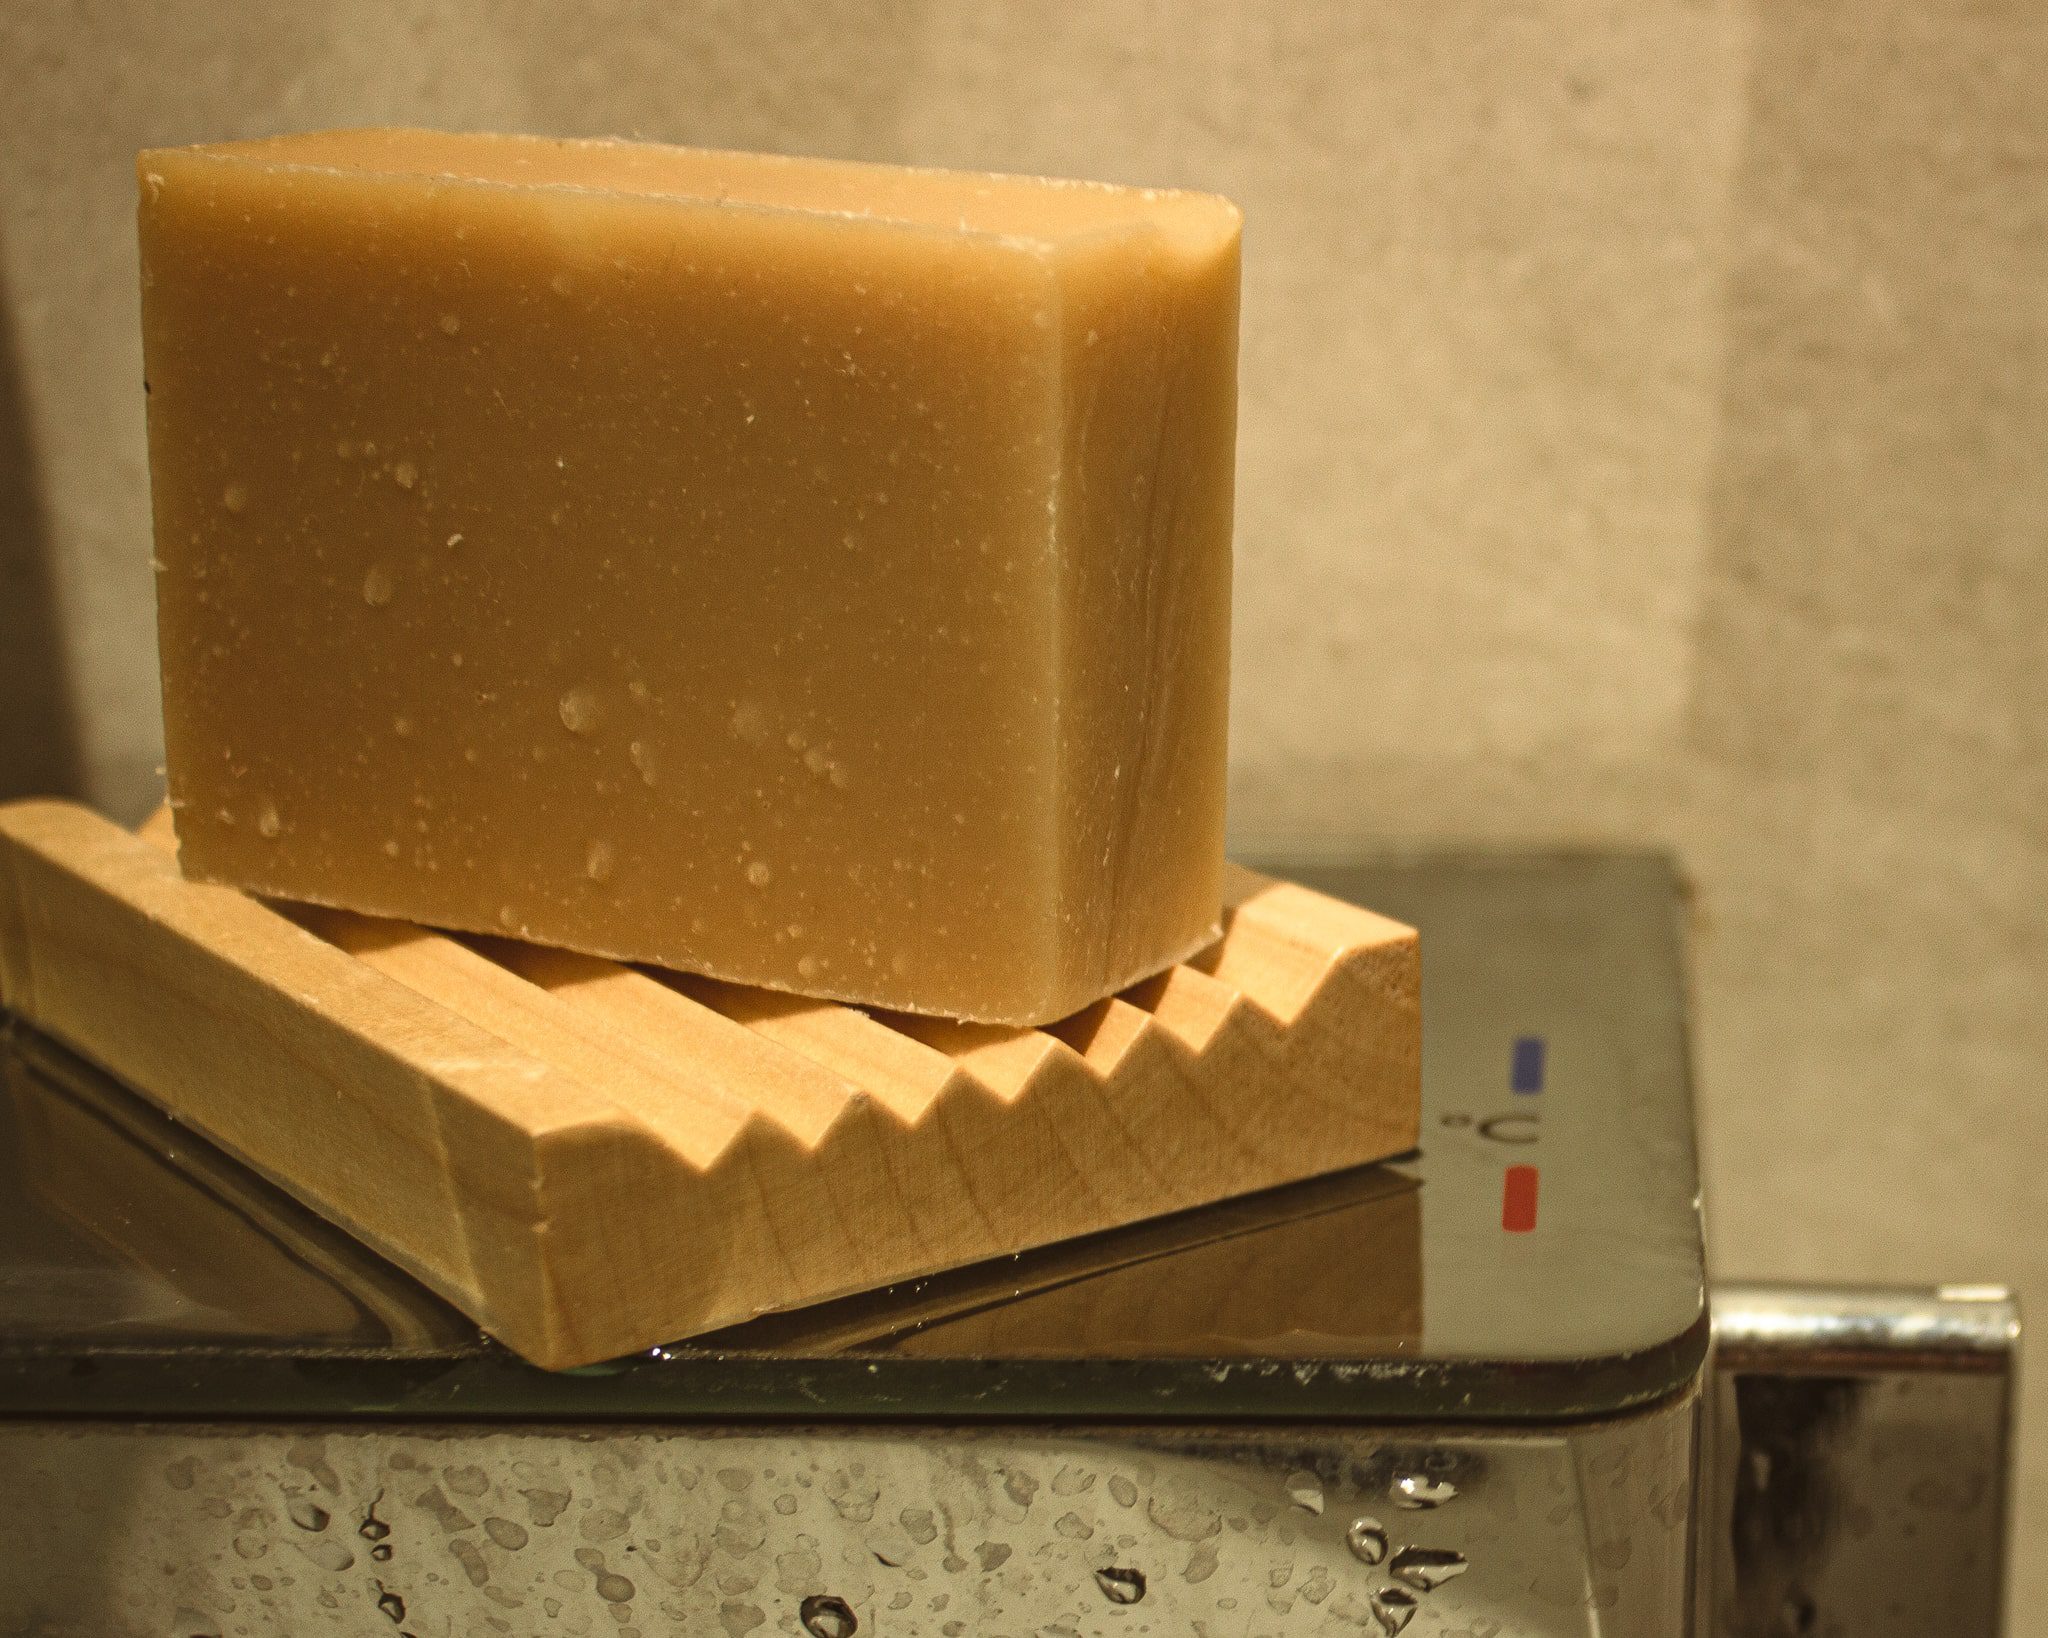 Goat Milk Soap in shower, the bar of soap is resting on a wood soap tray.